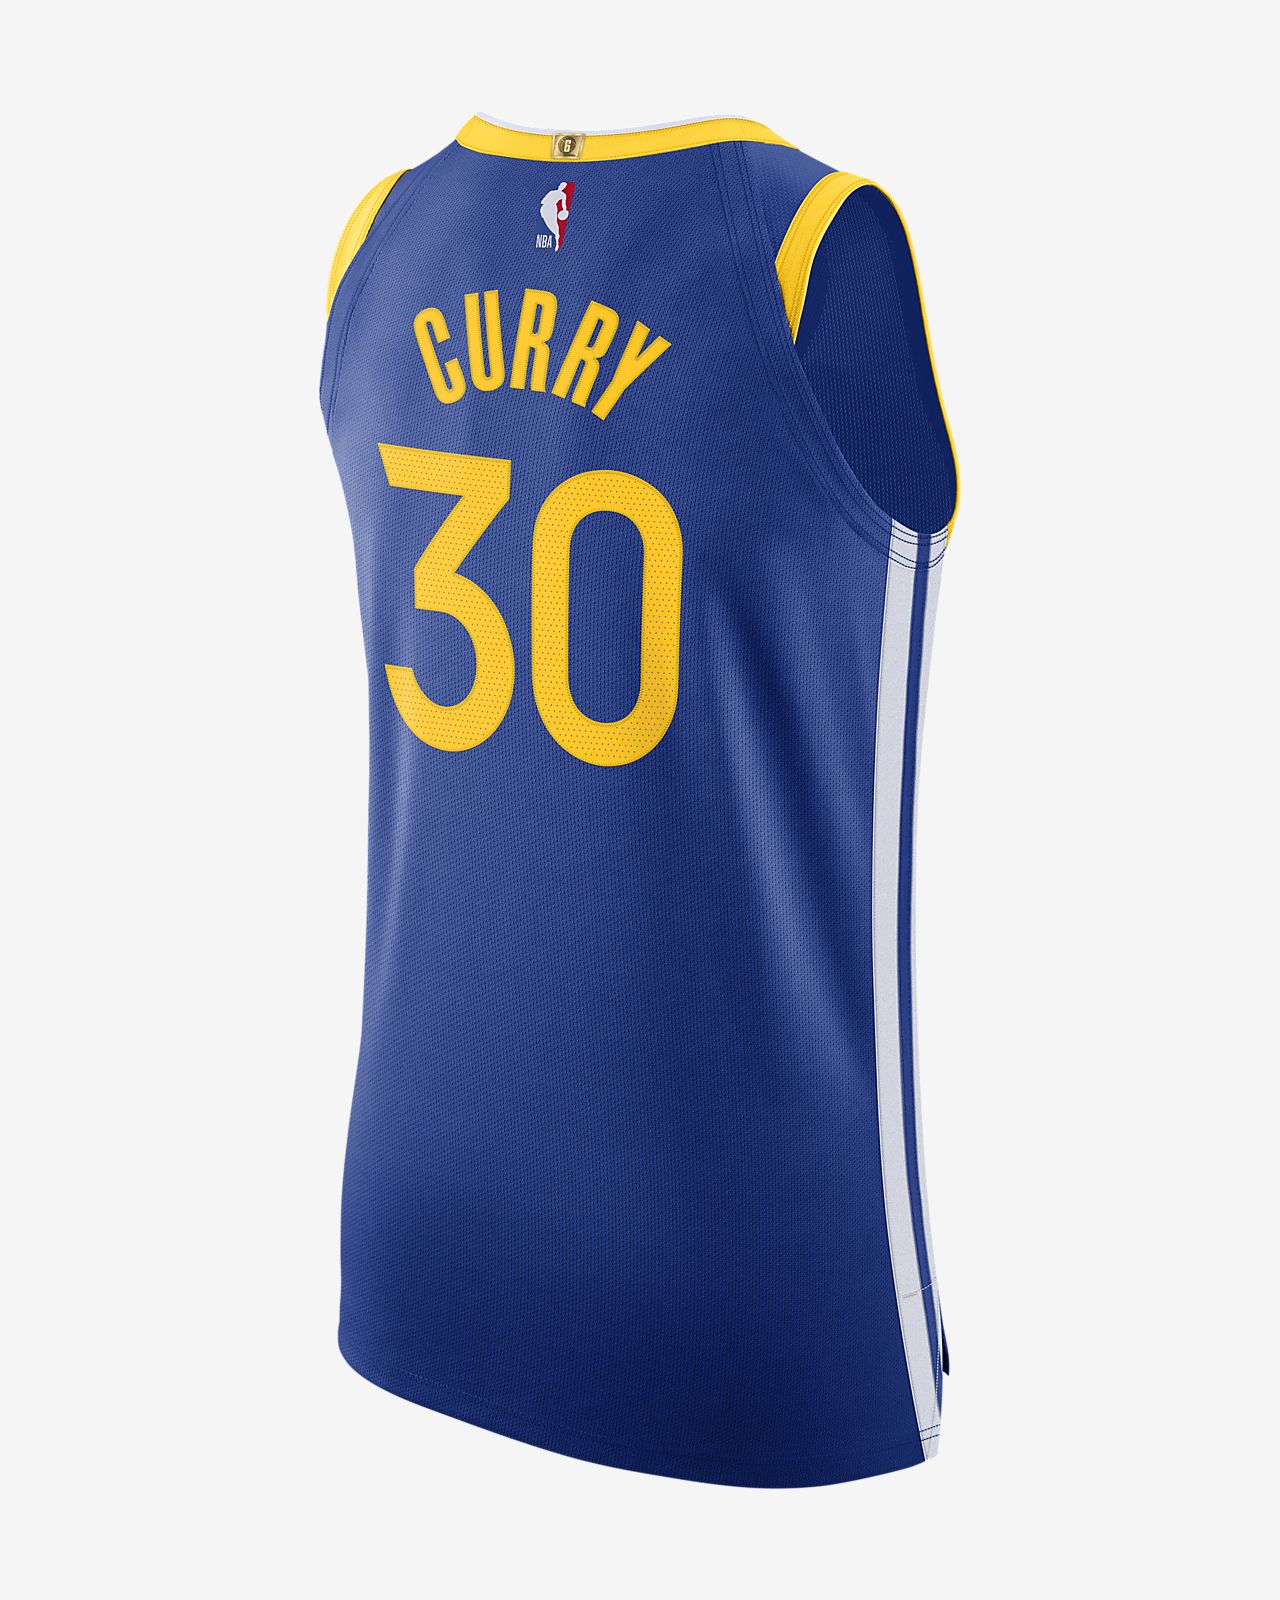 stephen curry jersey price in 